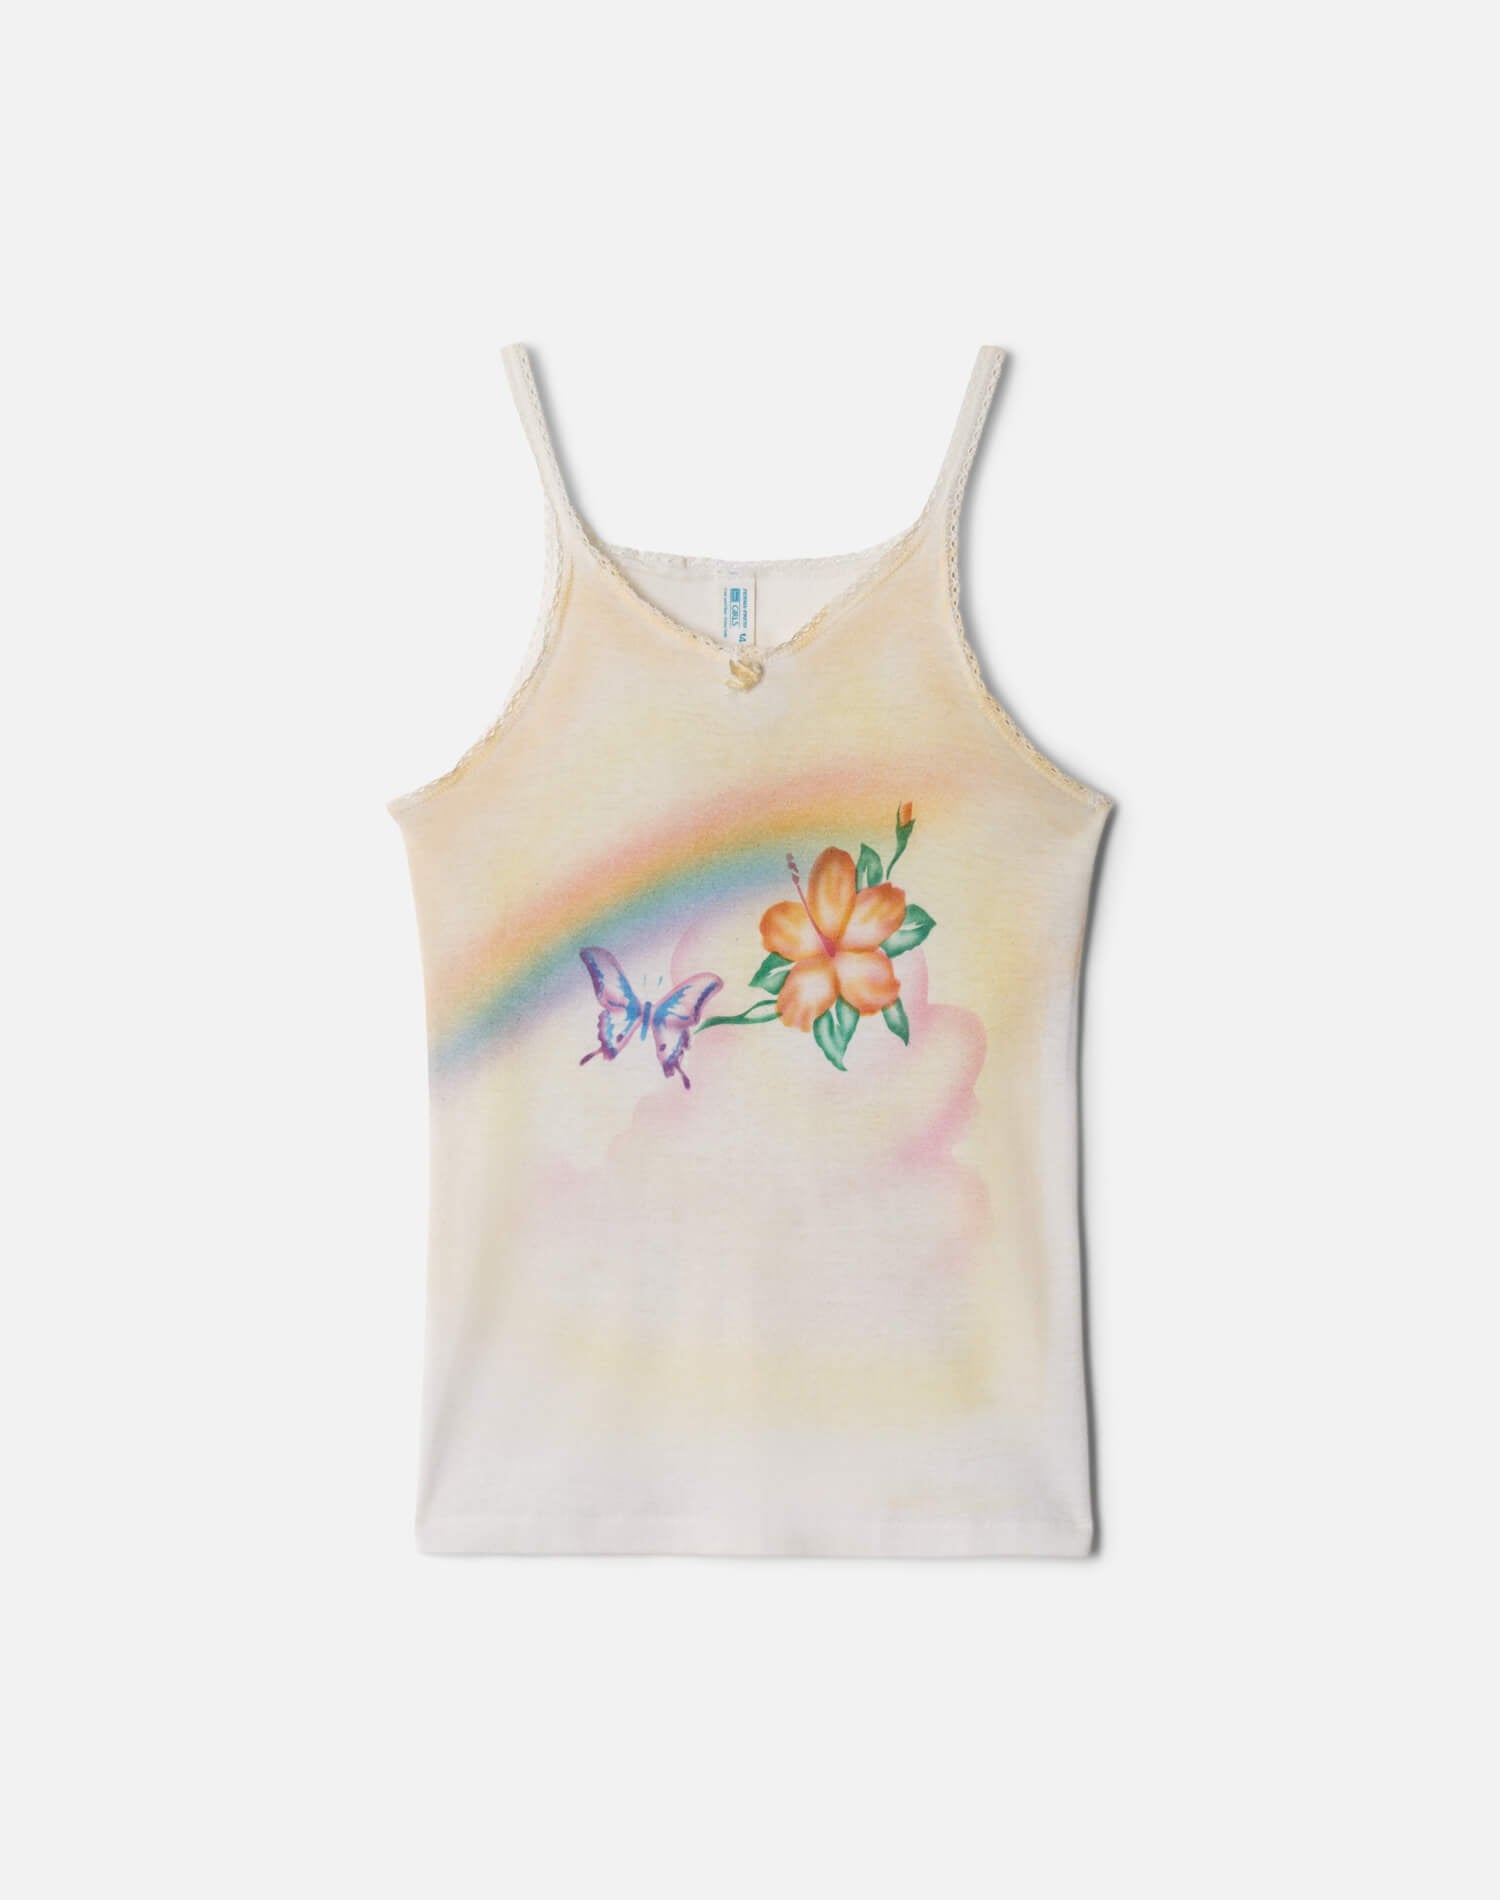 70s Airbrush Lace Baby Tank